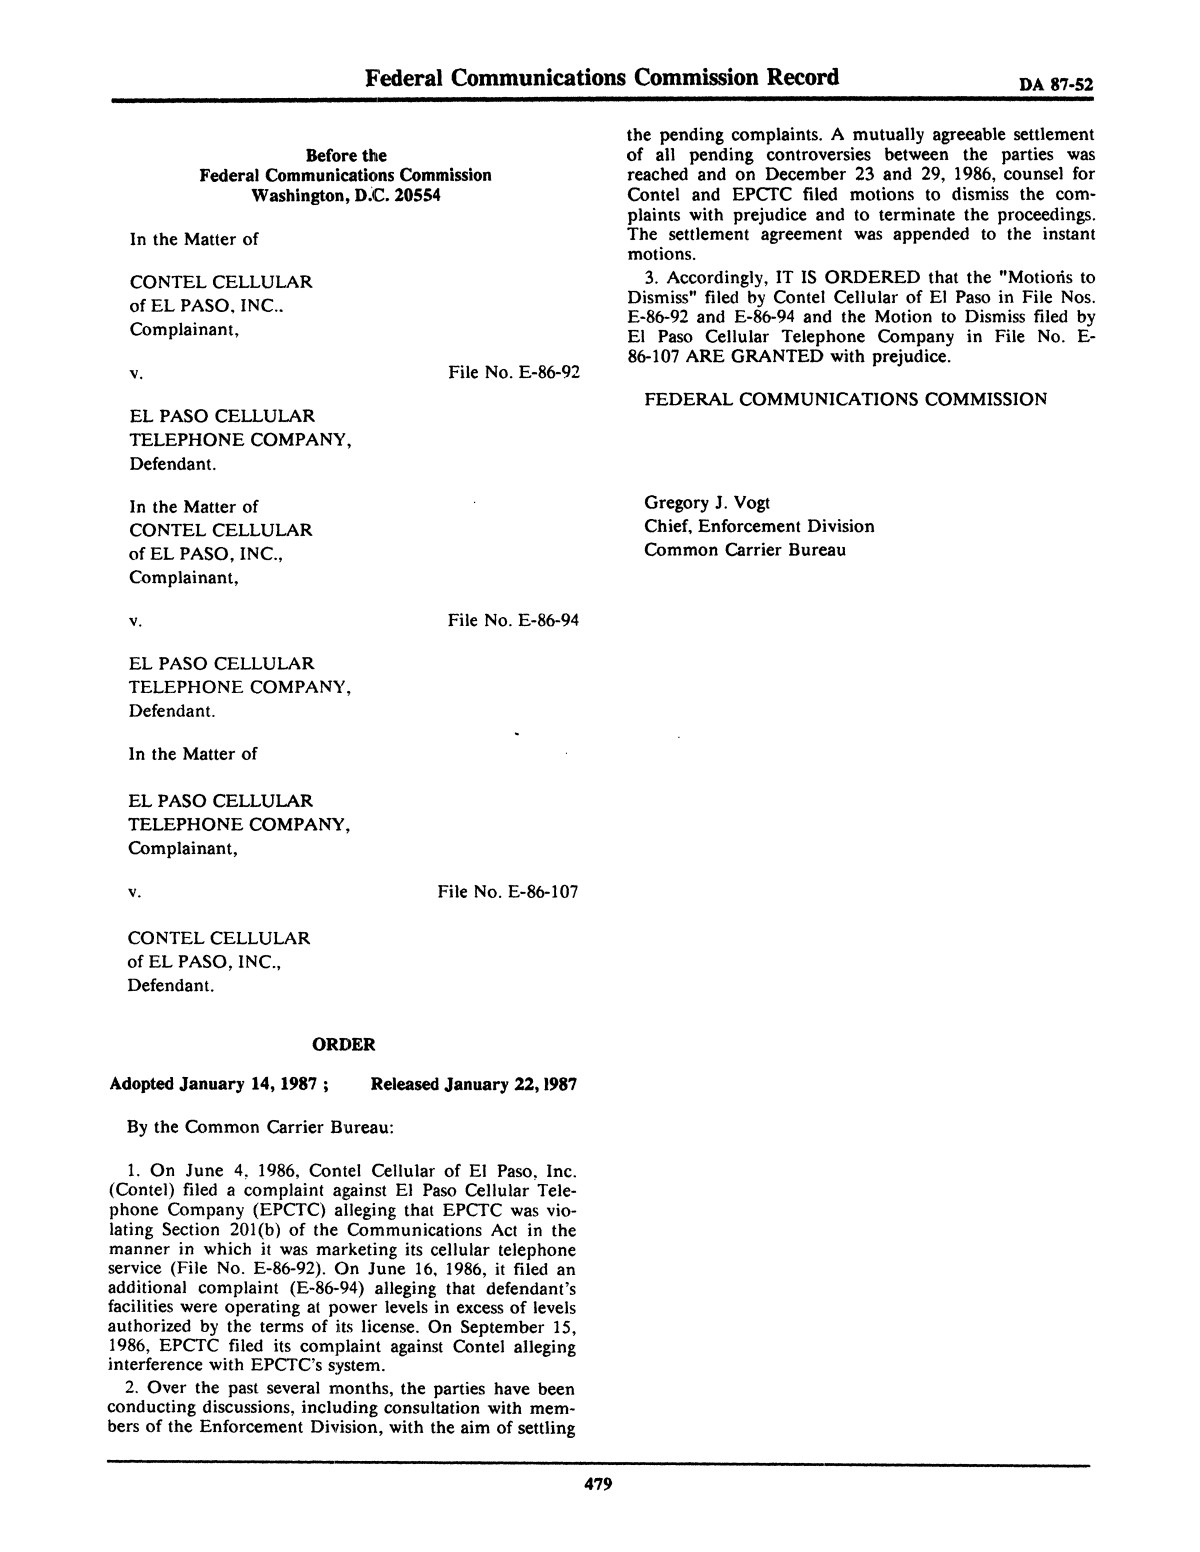 FCC Record, Volume 2, No. 2, Pages 410 to 642, January 20 - January 30, 1987
                                                
                                                    479
                                                